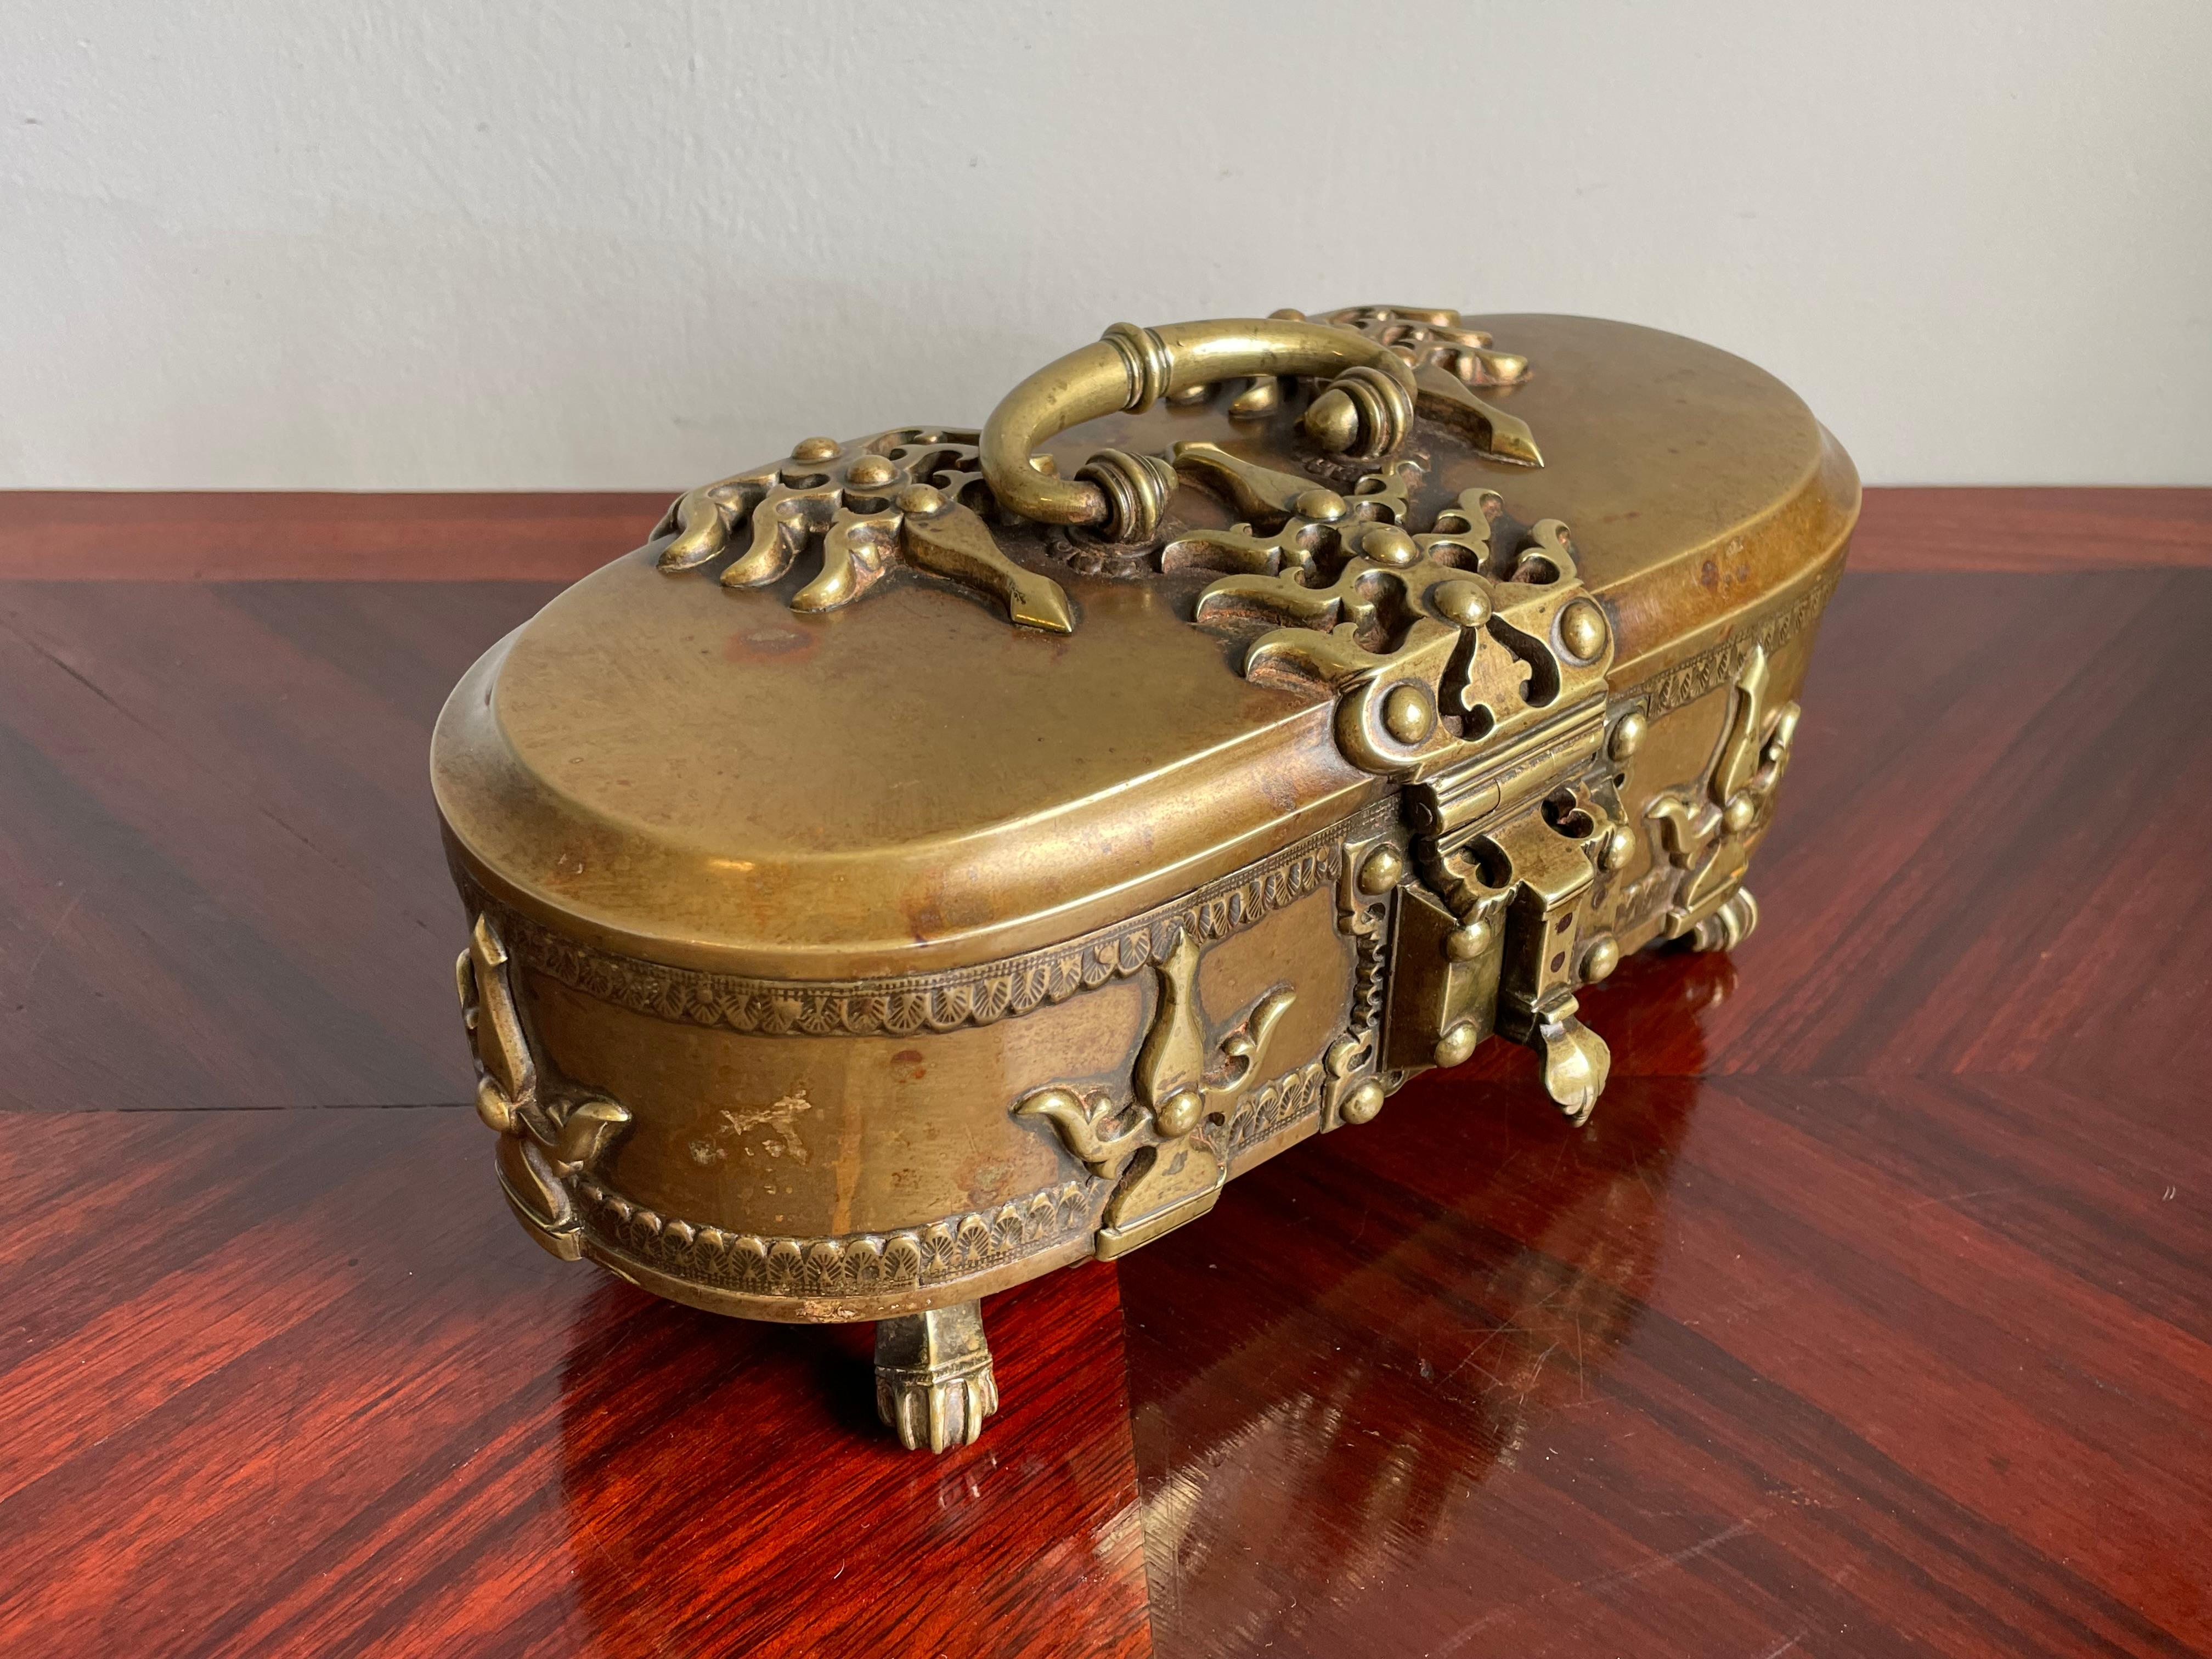 Top quality, good size and excellent condition antique box for the connoisseurs.

How do you price a one of a kind antique of a quality and beauty that cannot be found anywhere in the world except maybe in a museum somewhere and that can only have